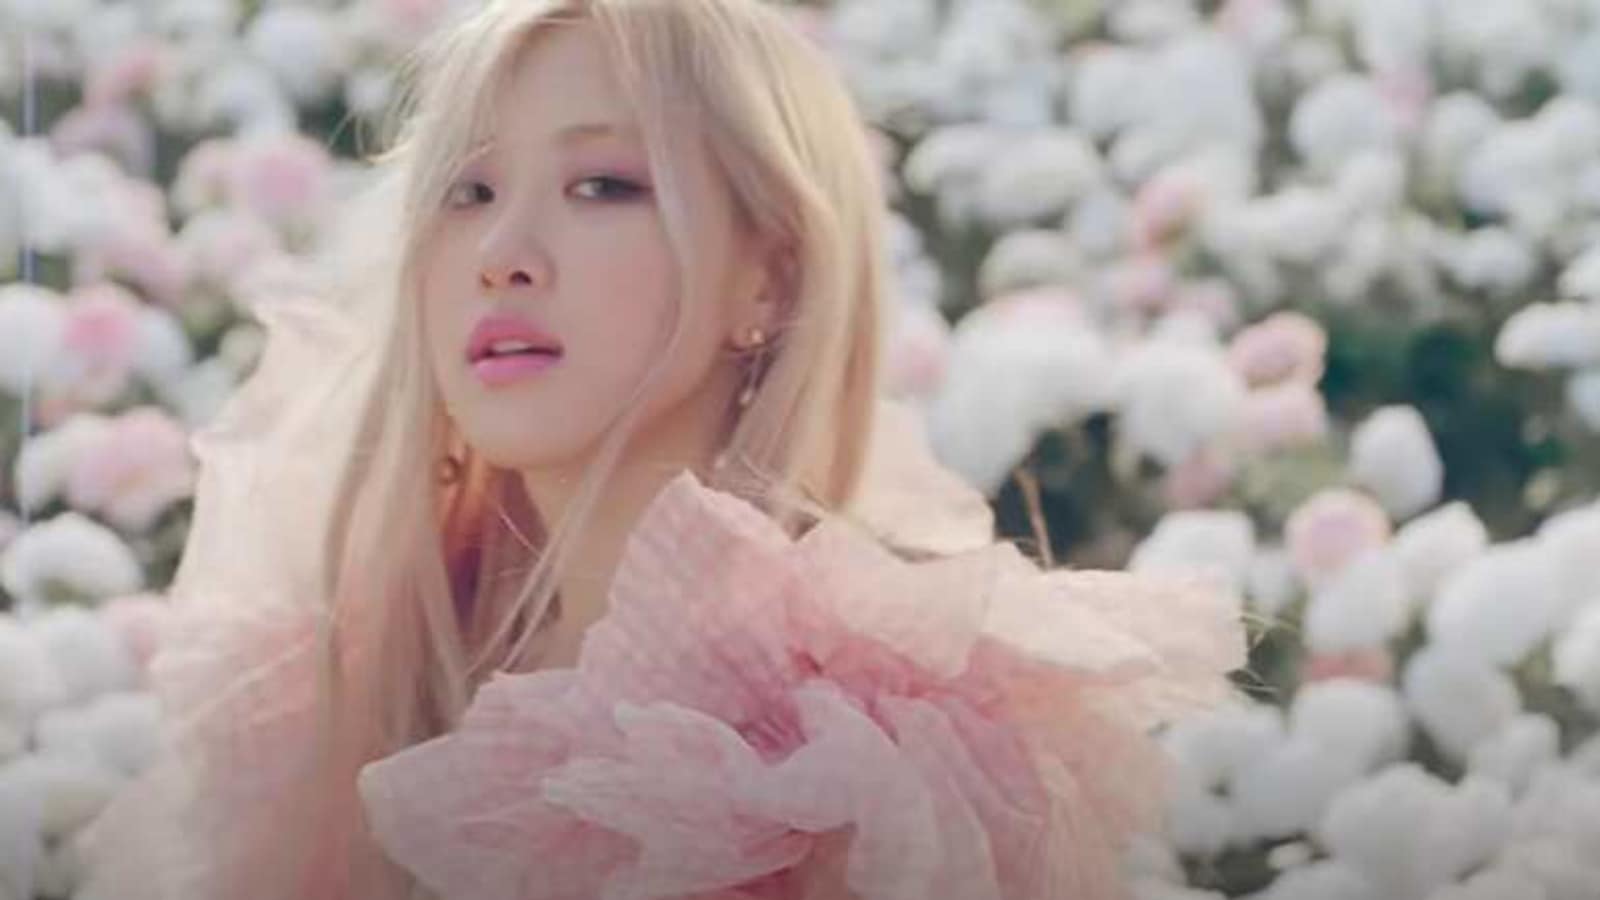 On The Ground MV: BLACKPINK member Rosé makes her solo debut with